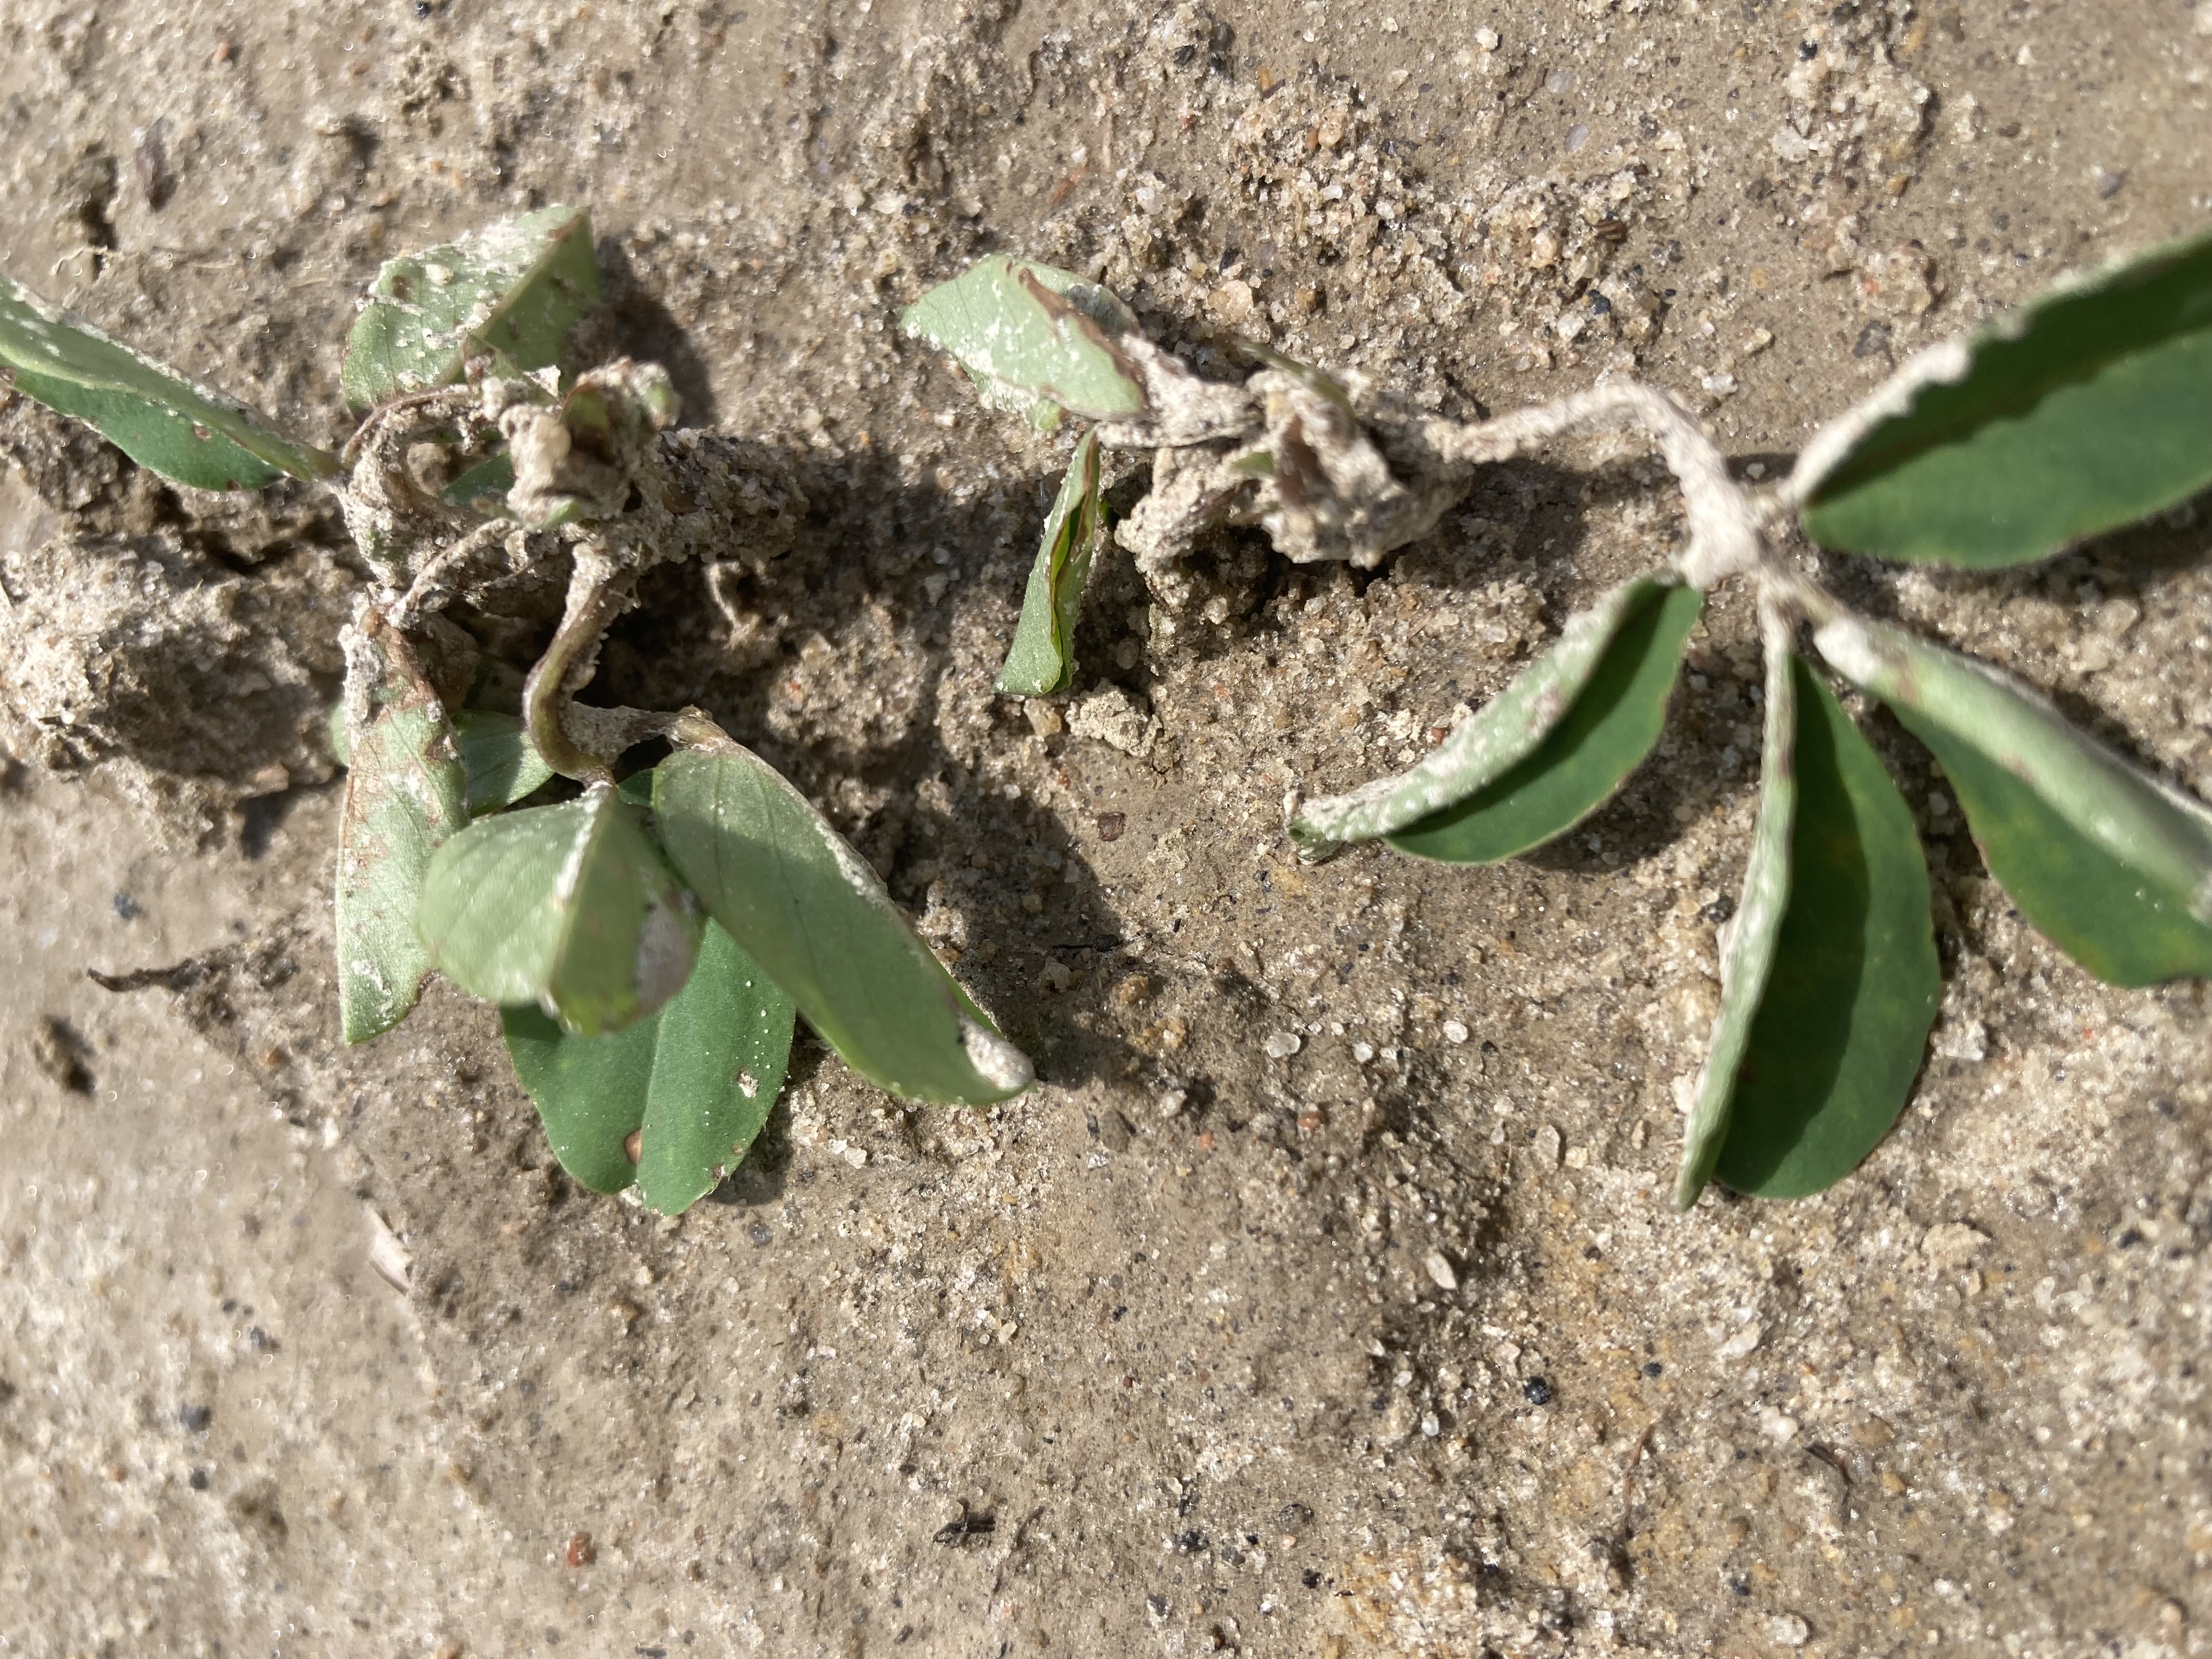 A peanut plant laying on the ground.